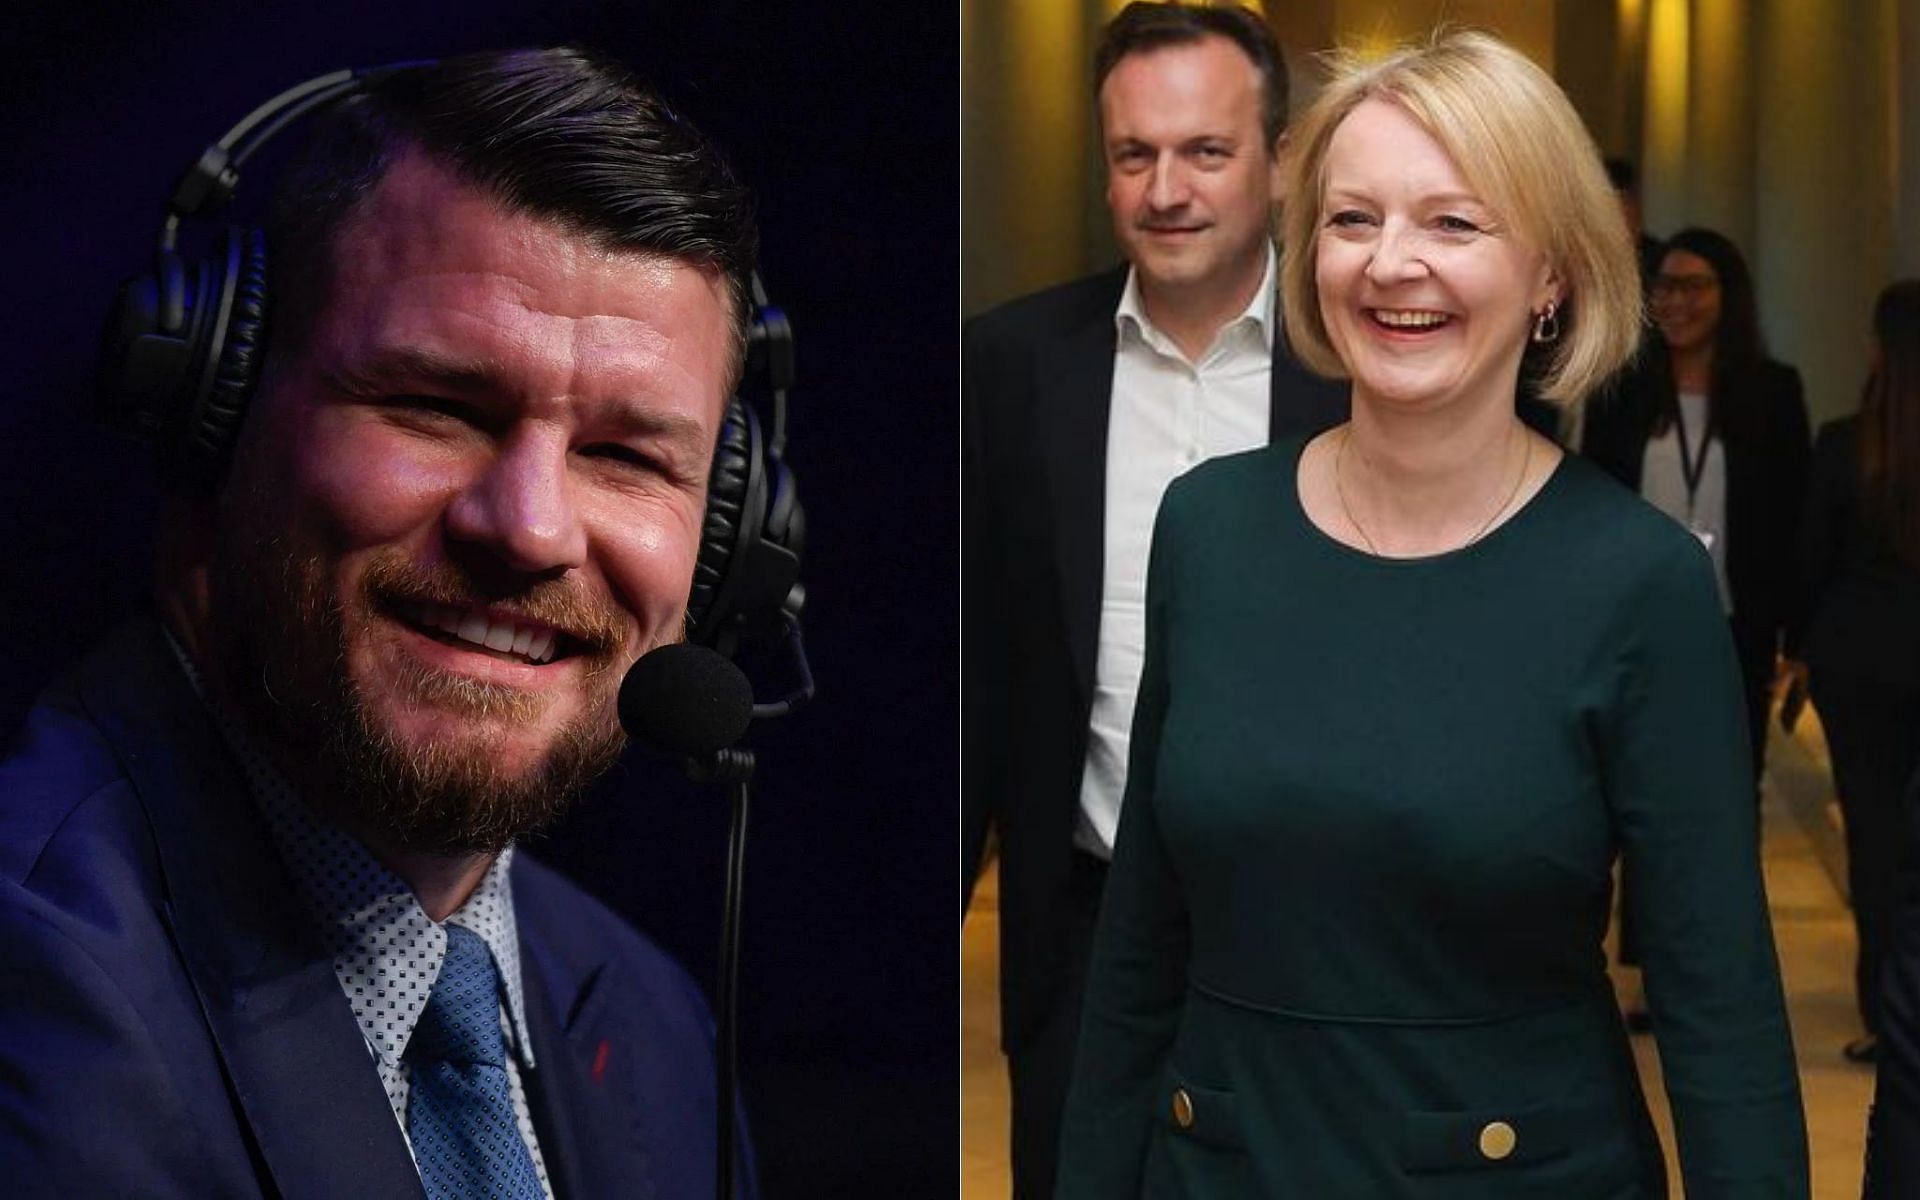 Michael Bisping (left) and Liz Truss (right) [image credits: @elizabeth.truss.mp on Instagram]